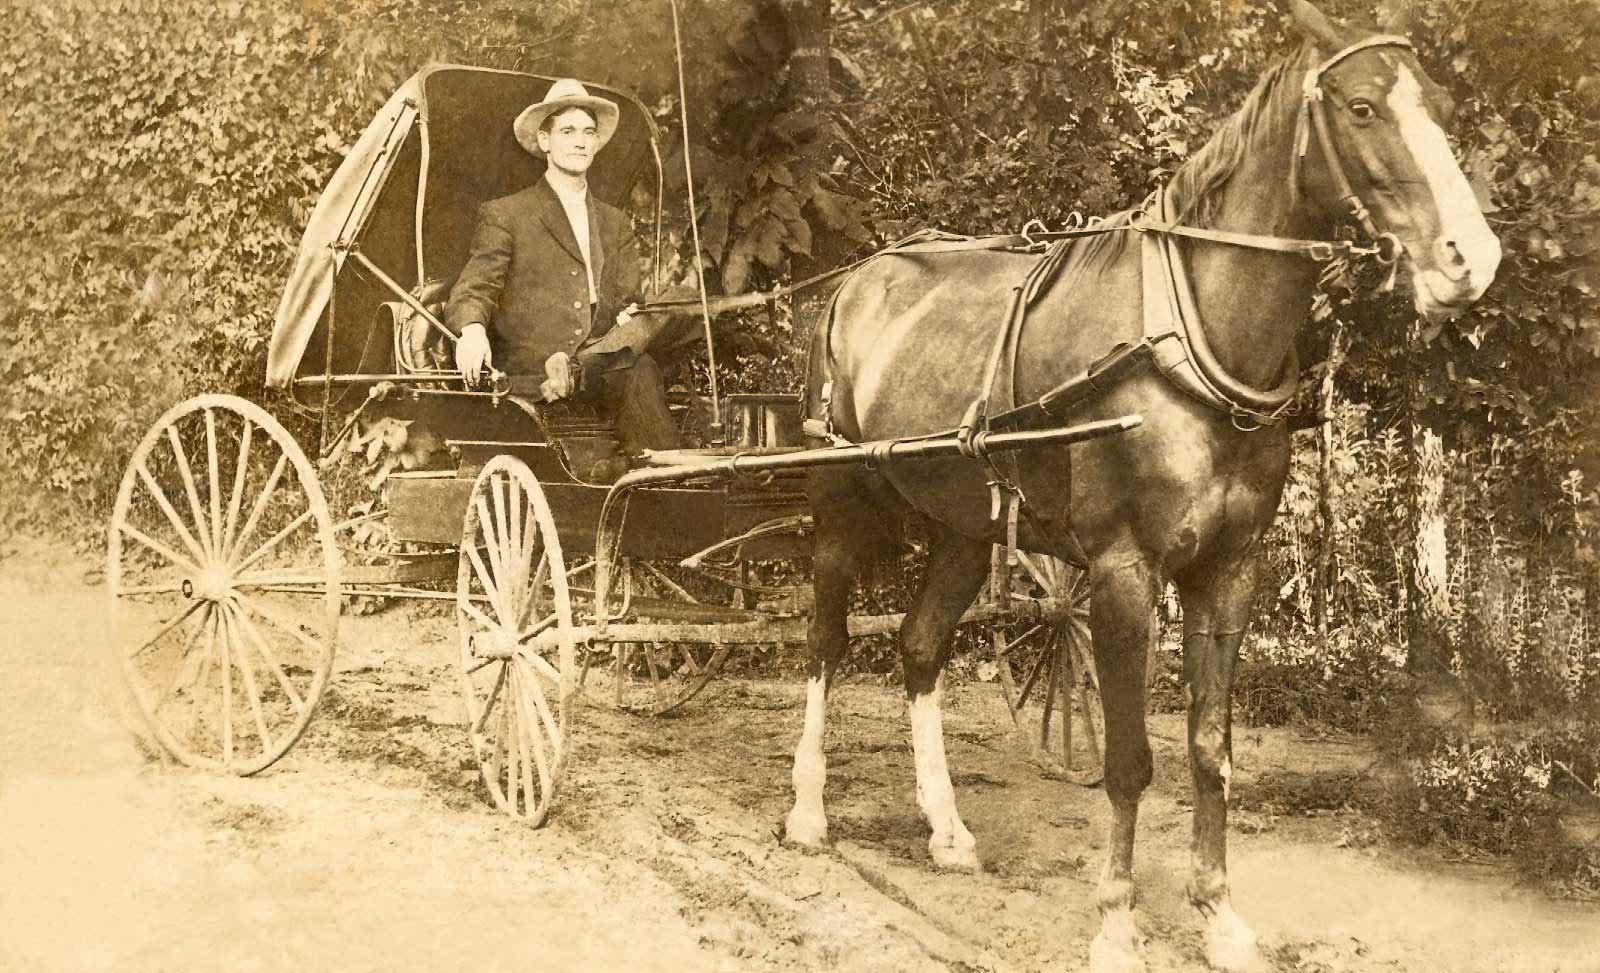 Man in a horse drawn carriage